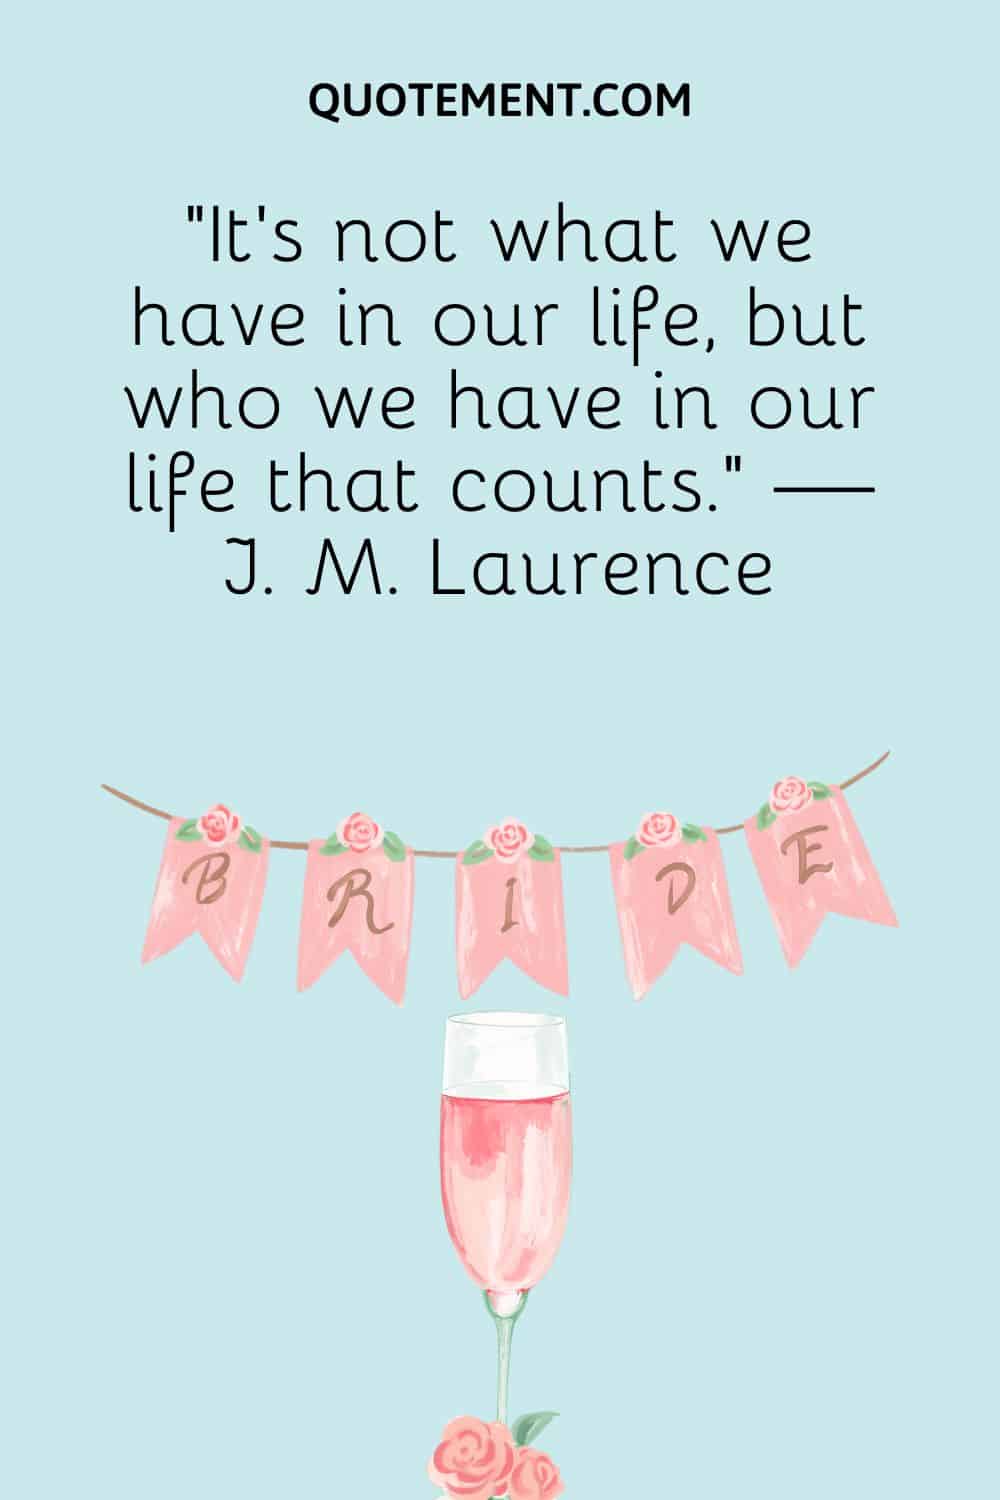 It’s not what we have in our life, but who we have in our life that counts. — J. M. Laurence